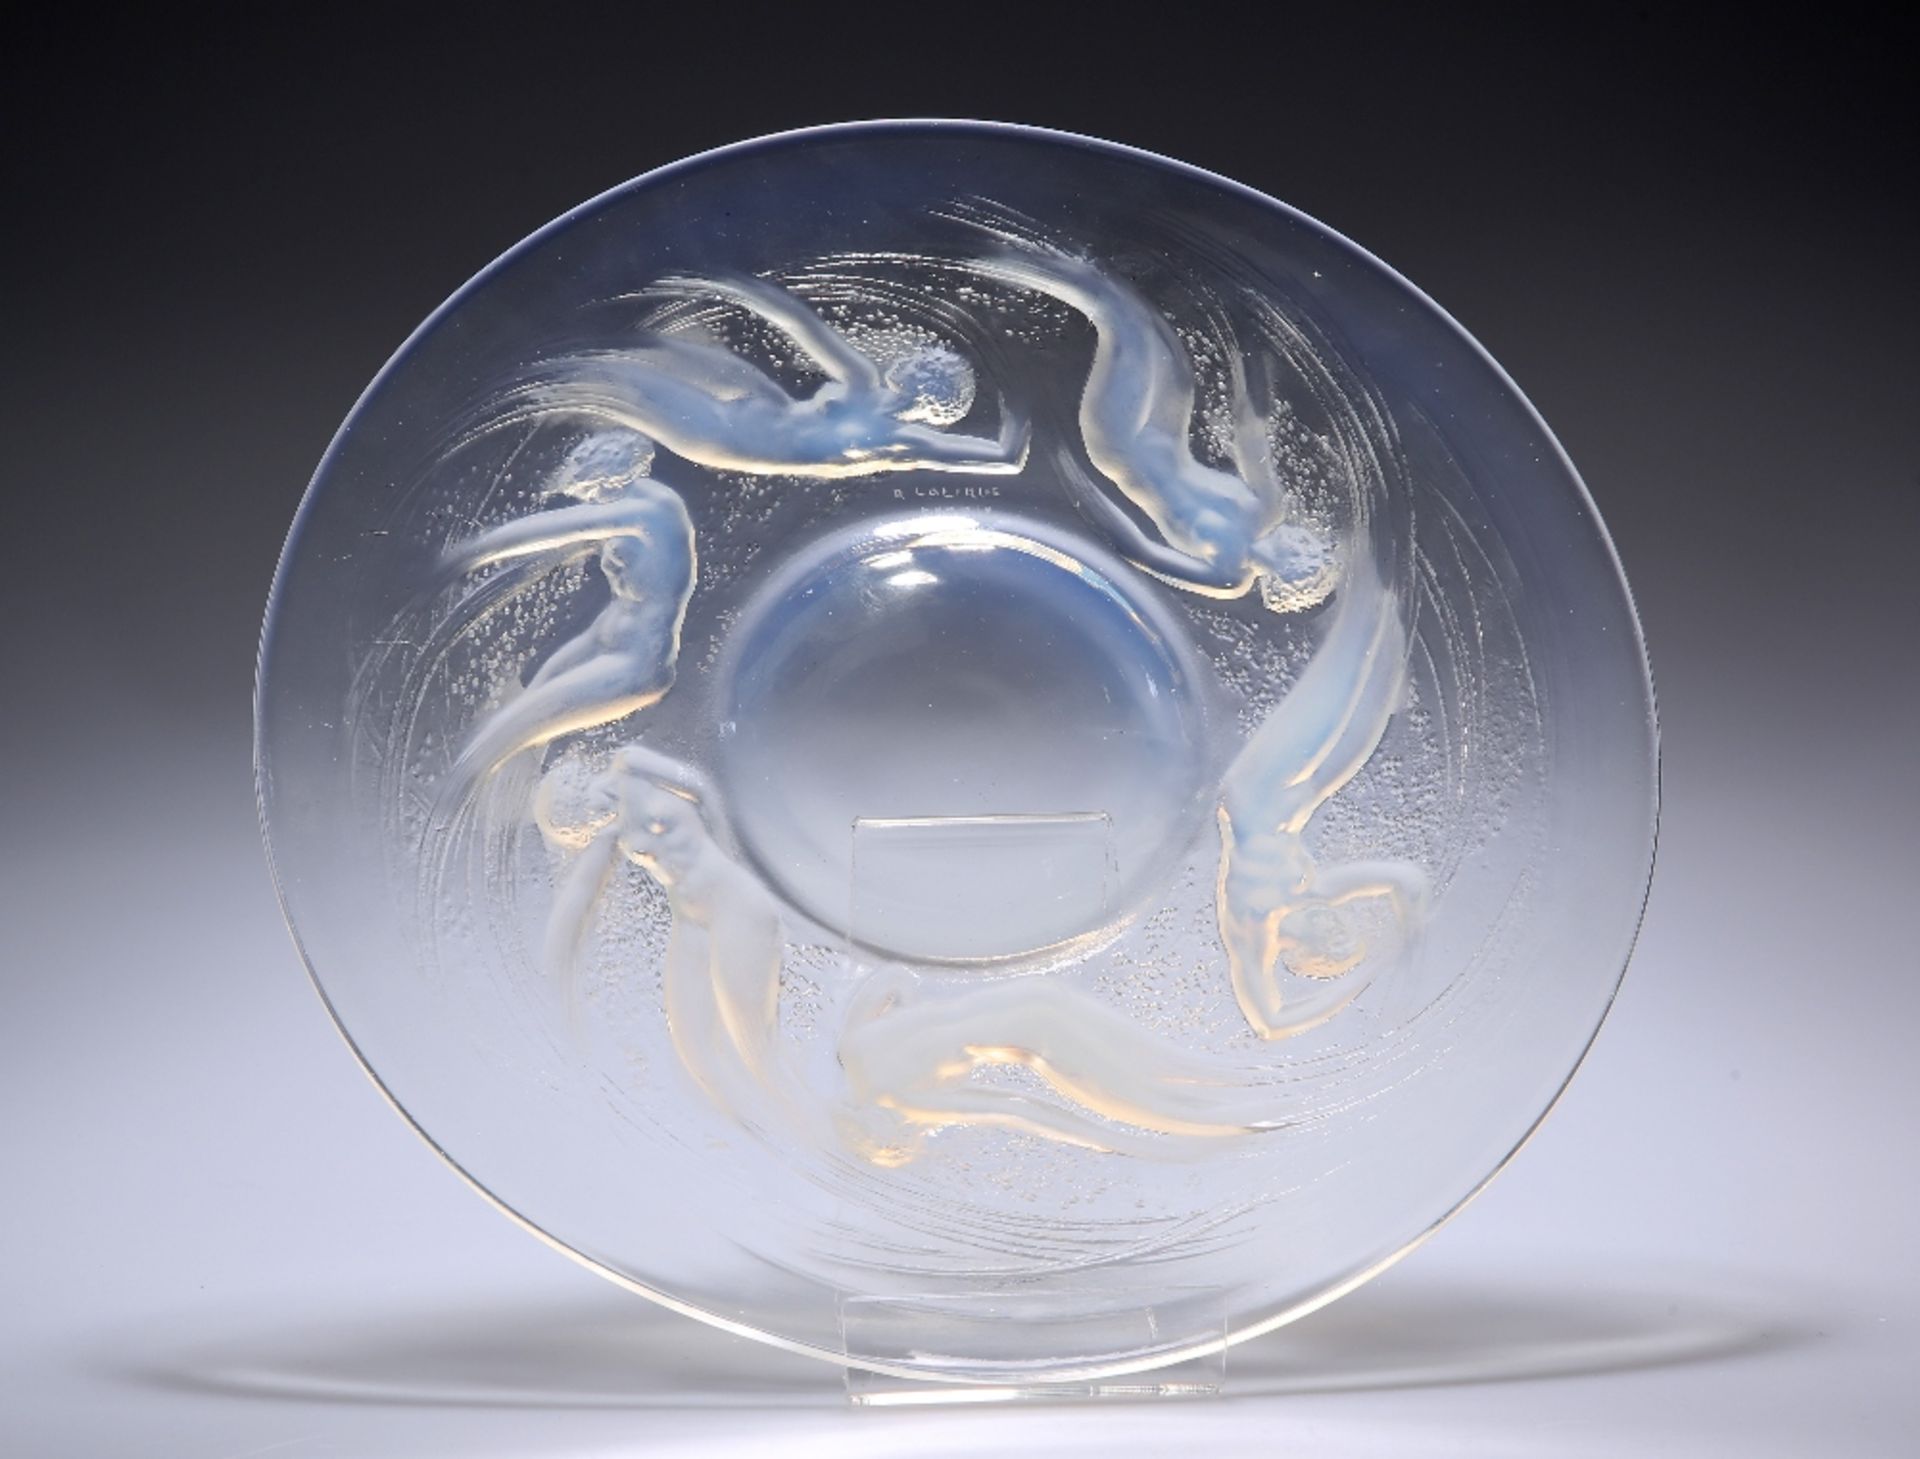 ONDINES - A LALIQUE PLATE - Image 2 of 2